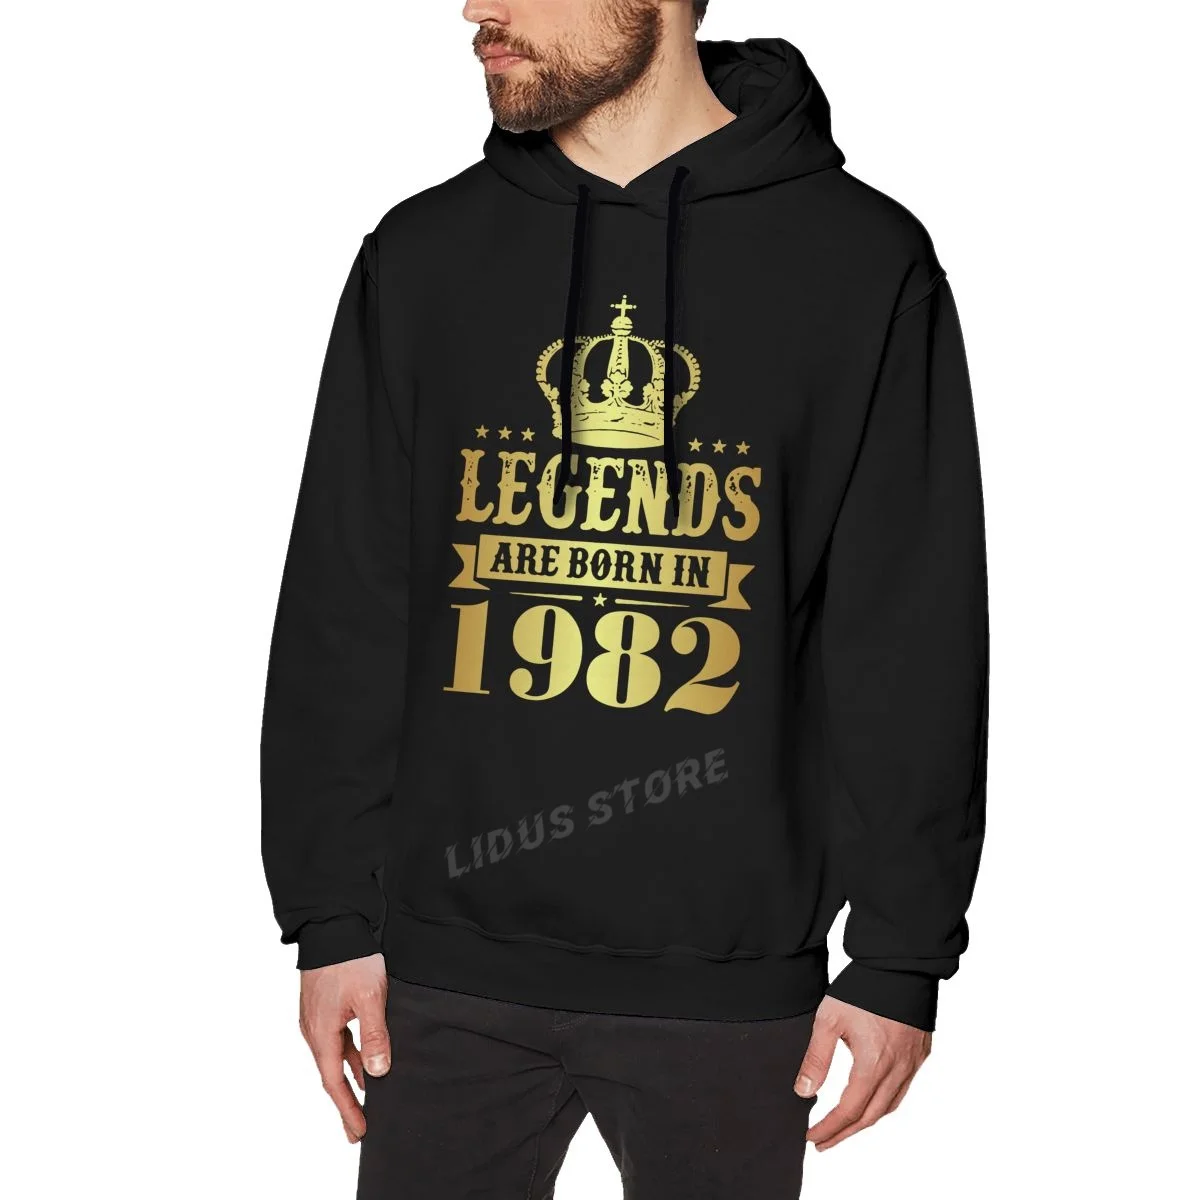 

Legends Are Born In 1982 40 Years For 40th Birthday Gift Hoodie Sweatshirts Harajuku clothes 100% Cotton Streetwear Hoodies